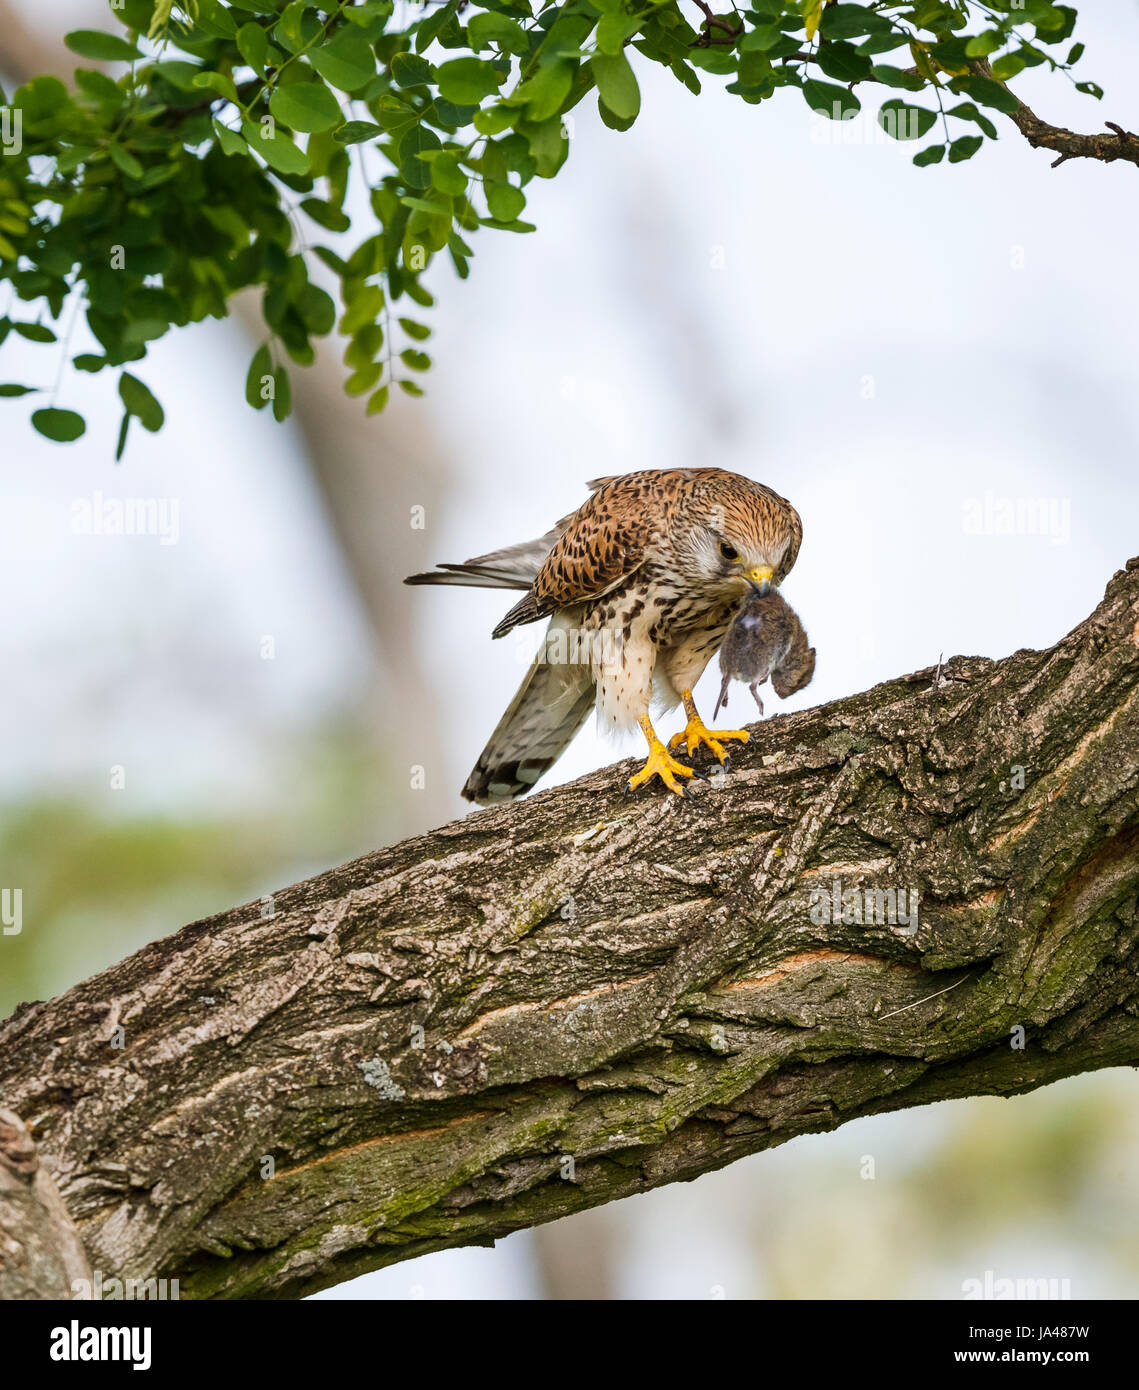 Female red-footed falcon (Falco vespertinus) with mouse prey on a branch, Koros-Maros National Park, Bekes County, Hungary Stock Photo